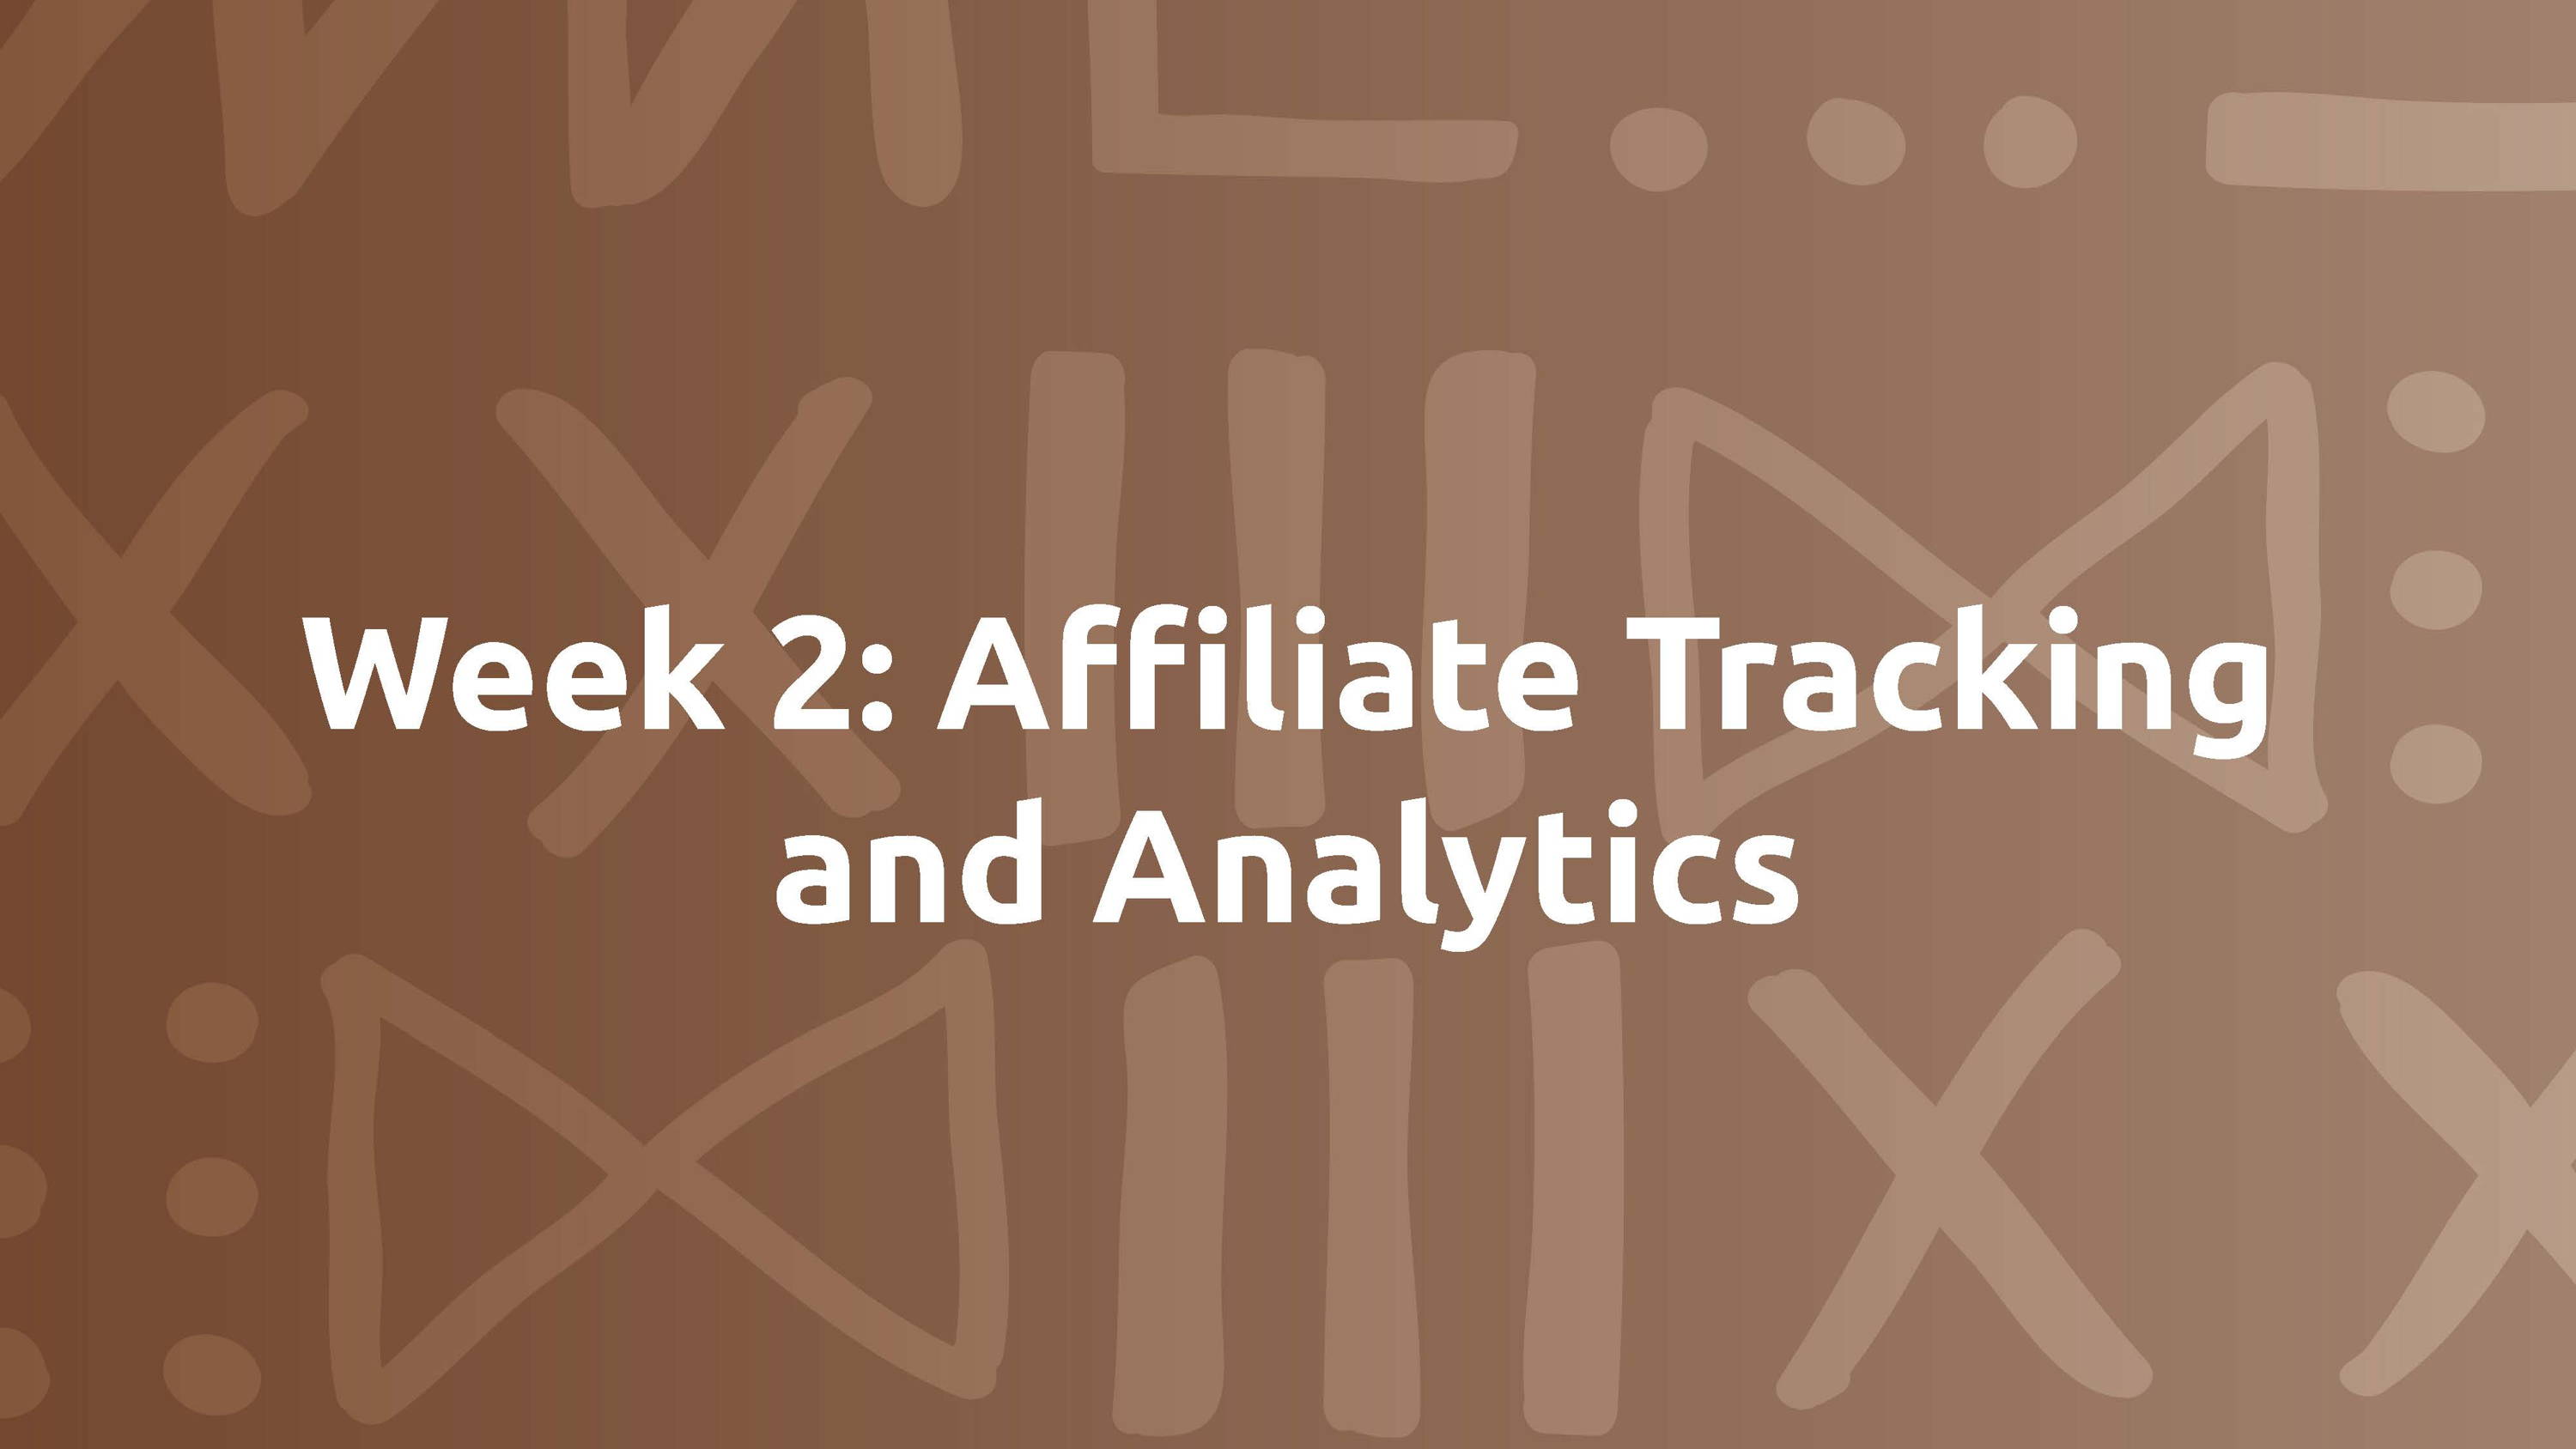 Week 2: Affiliate Tracking and Analytics